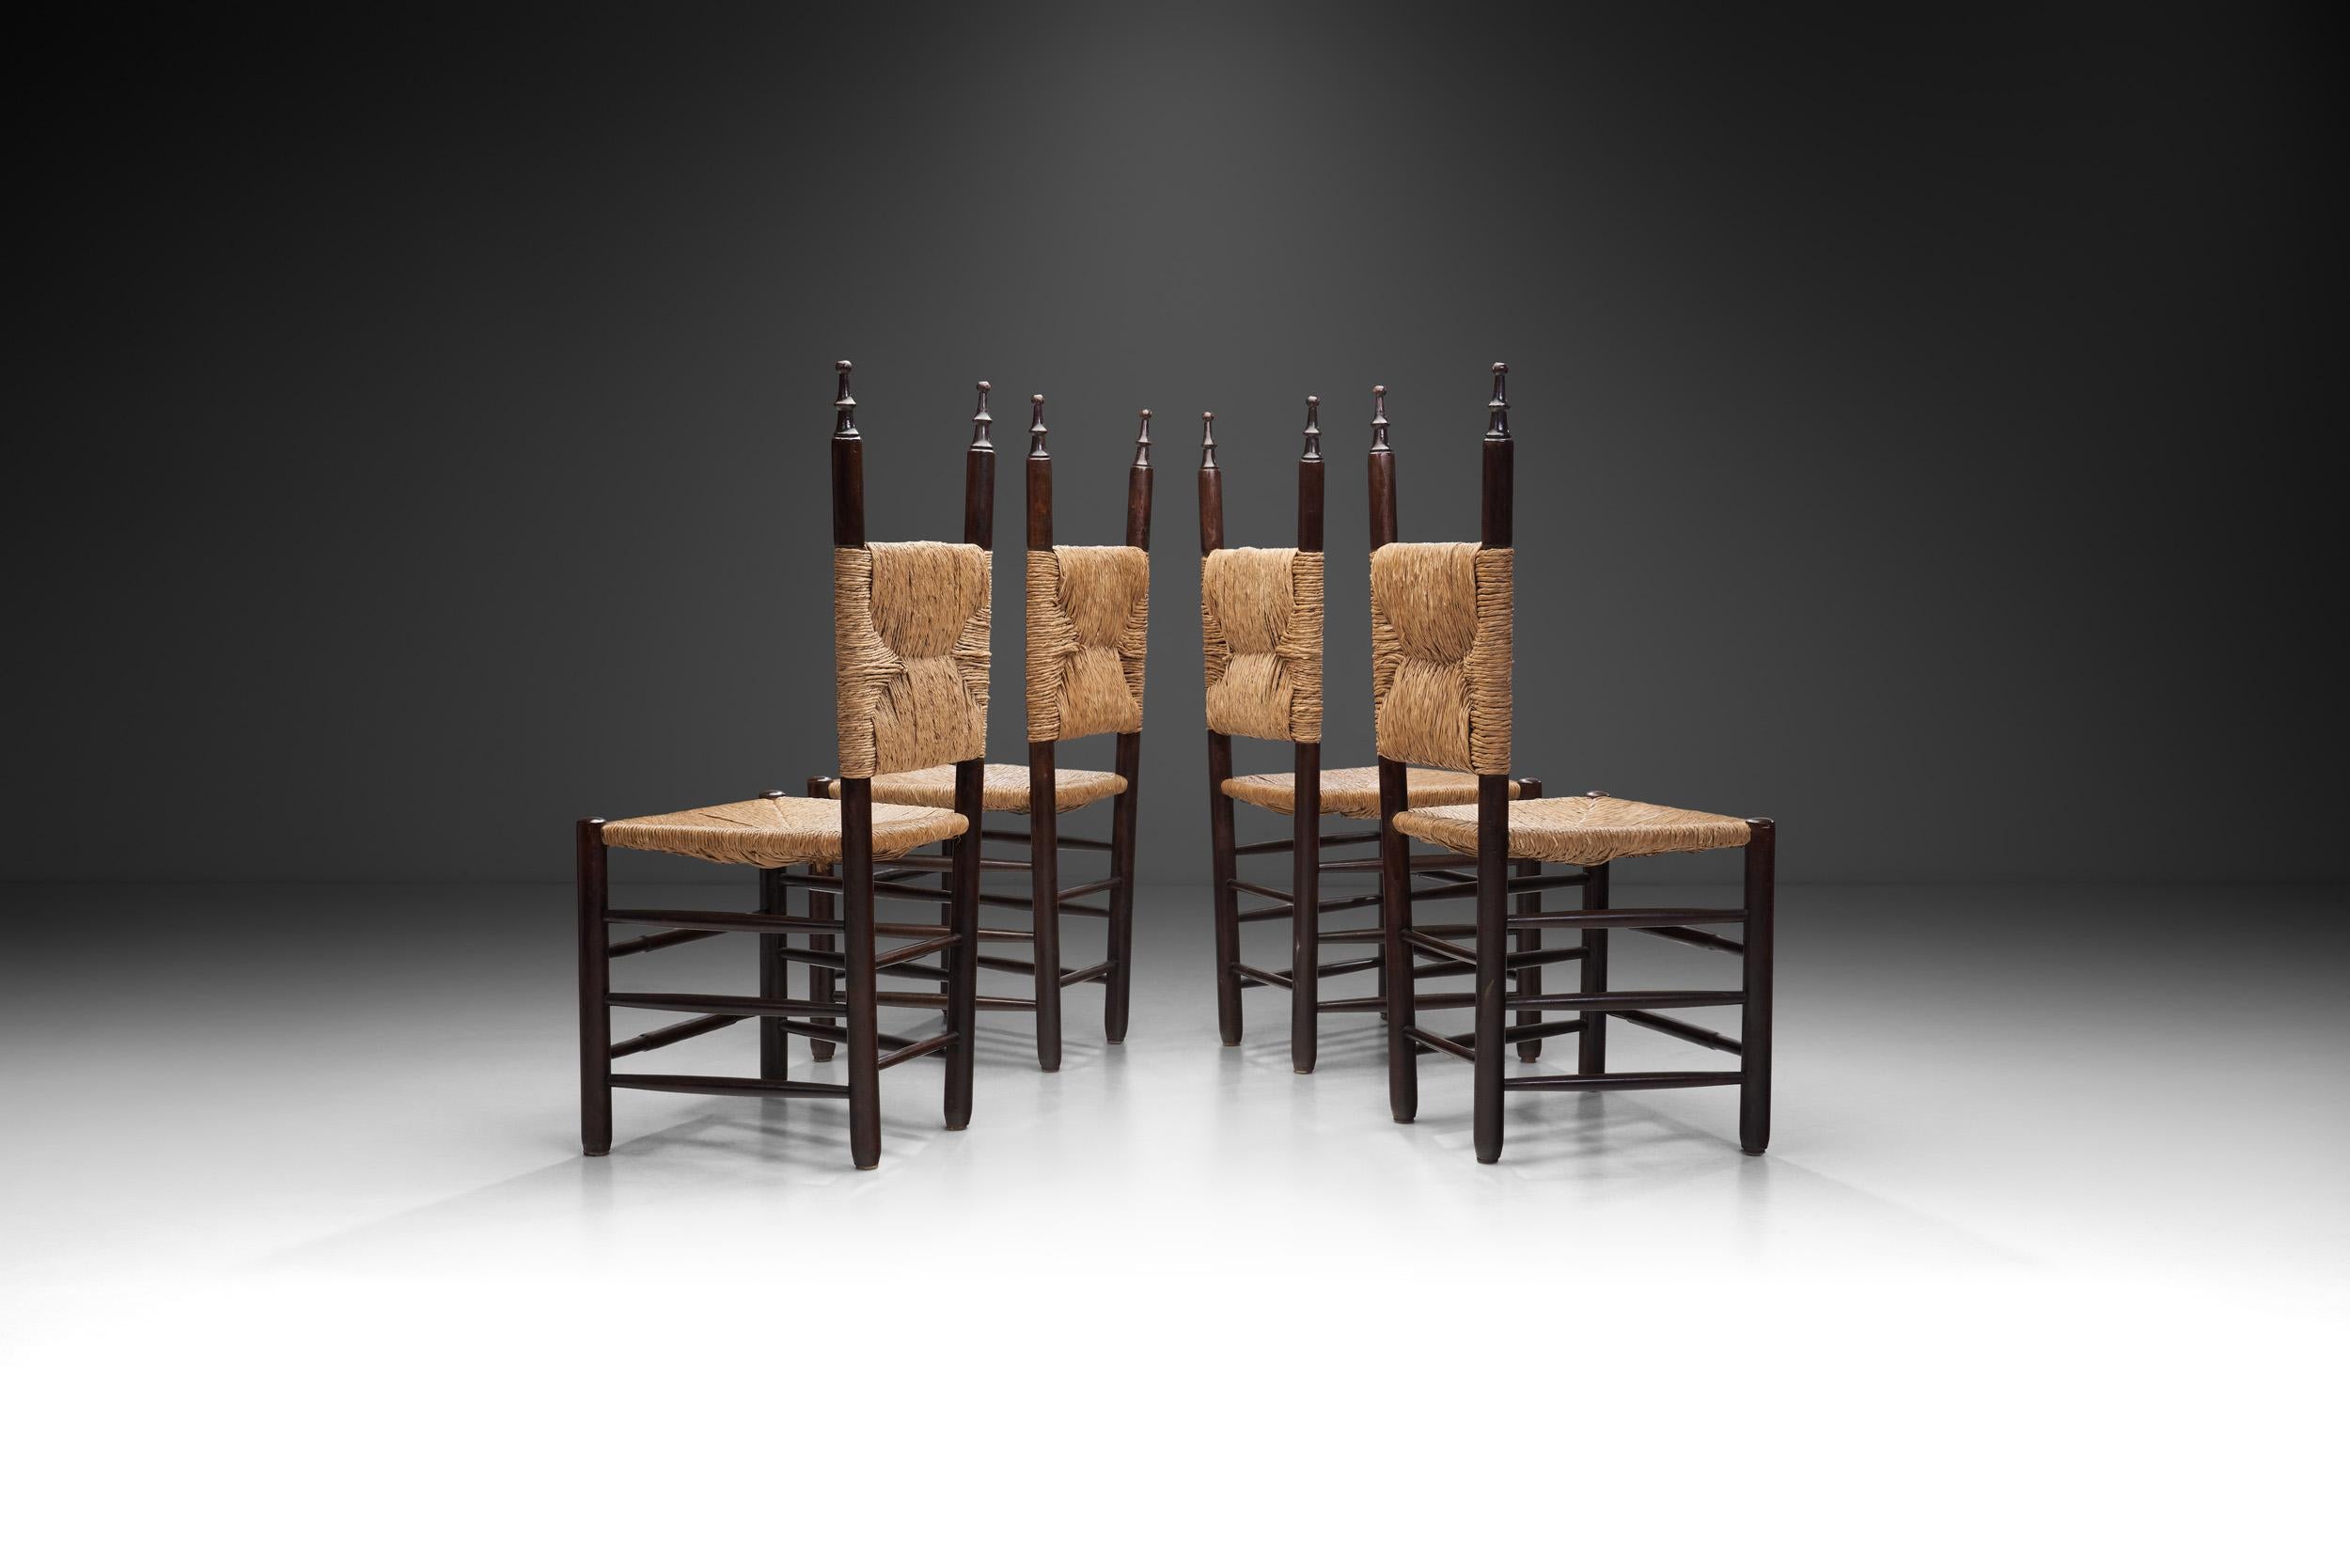 European Set of Four Dining Chairs with Poplar Wood and Rush Seats, Europe ca 1950s For Sale